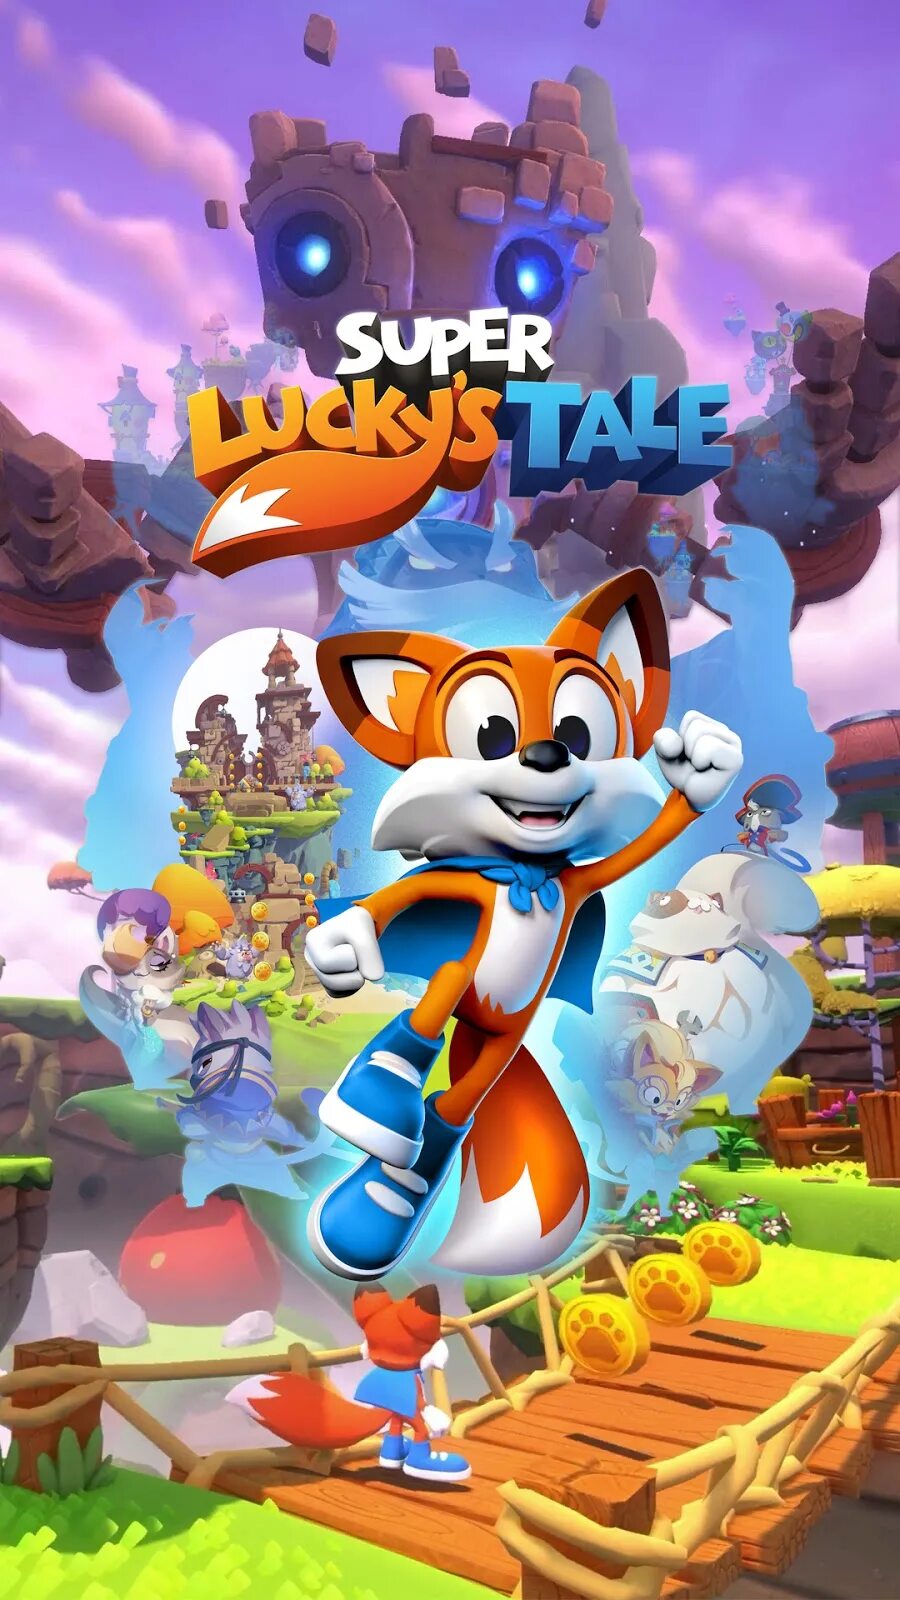 New lucky tale. Super Lucky s Tale. Super Lucky's Tale VR. Супер аркада. New super Lucky Tale.